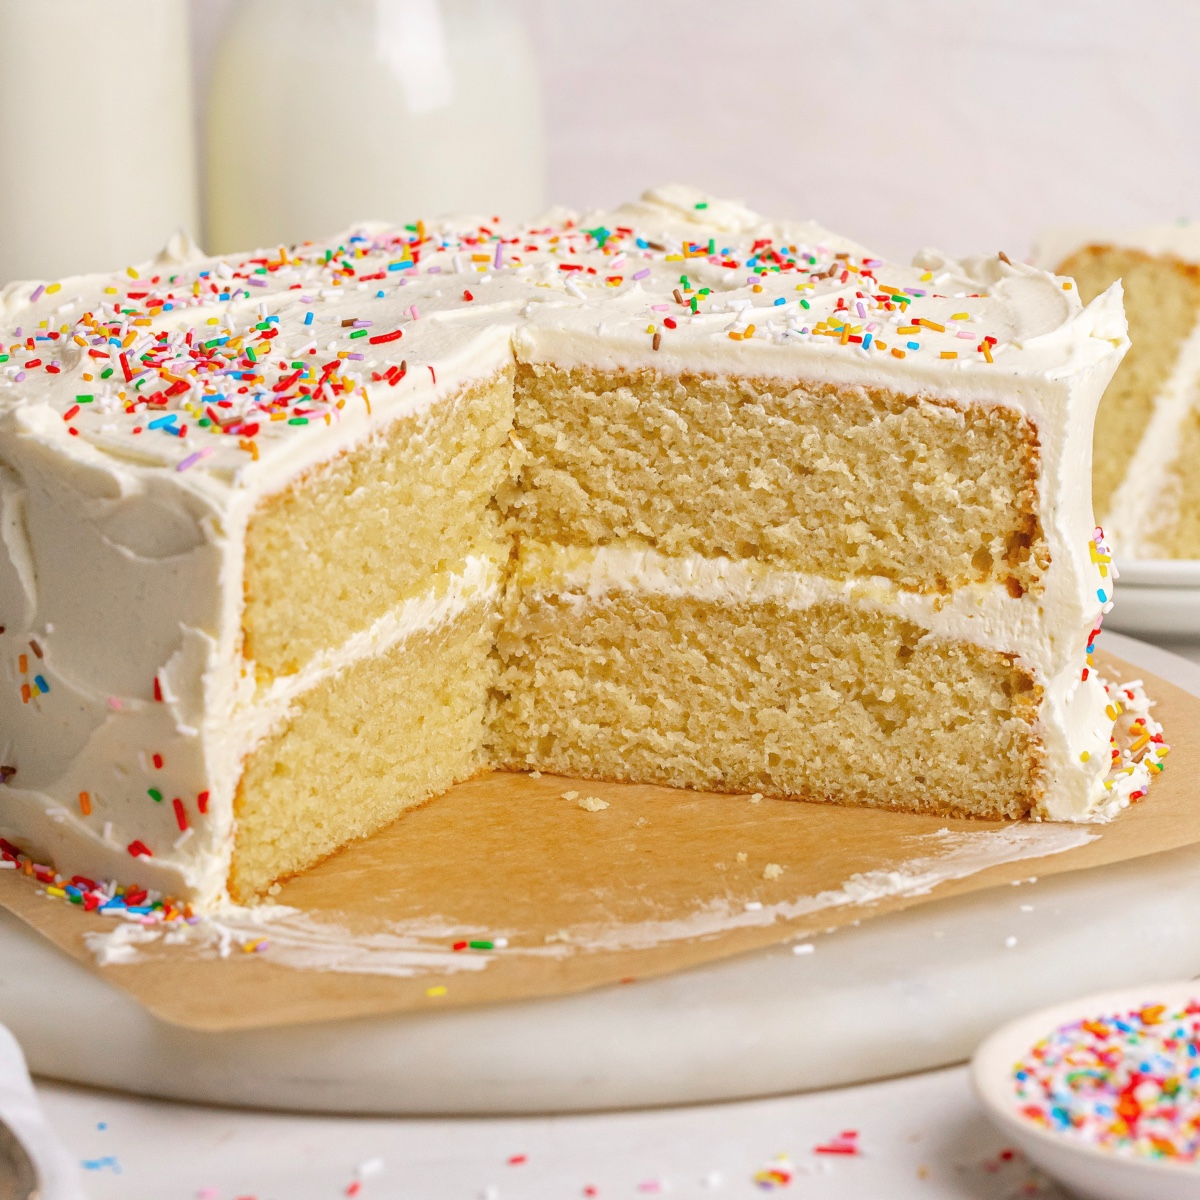 25 Classic Cakes Everyone Should Bake At Least Once